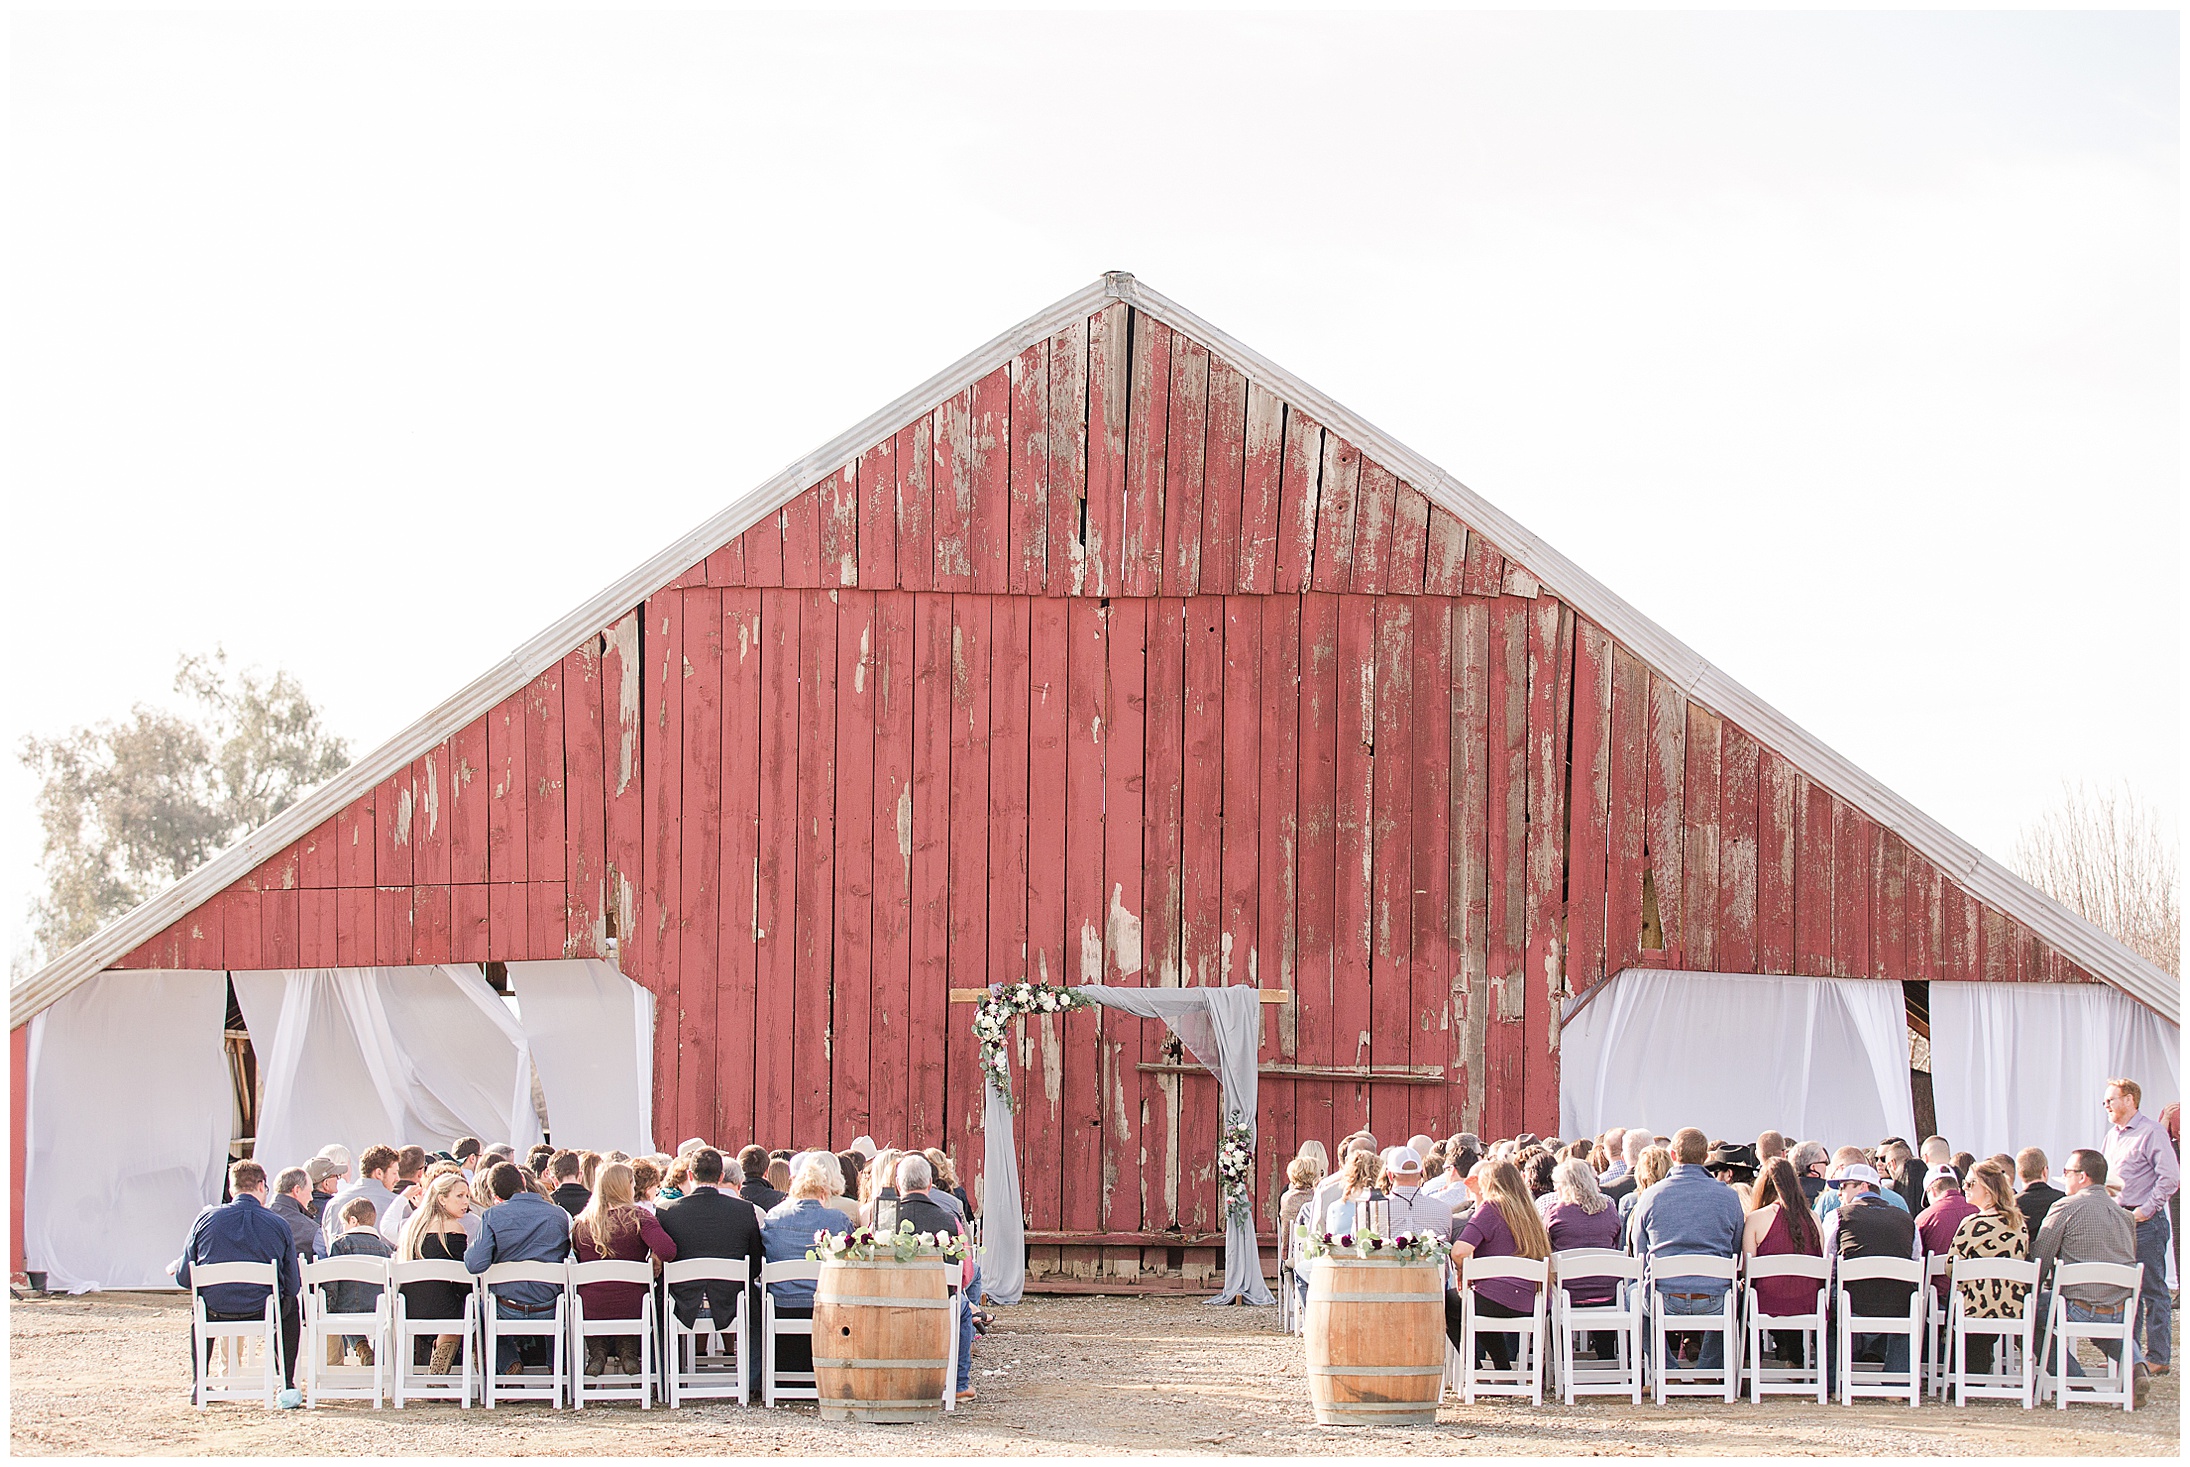 Country Wedding Willows California Red Barn Pole Barn Rustic Cowboy Boots,